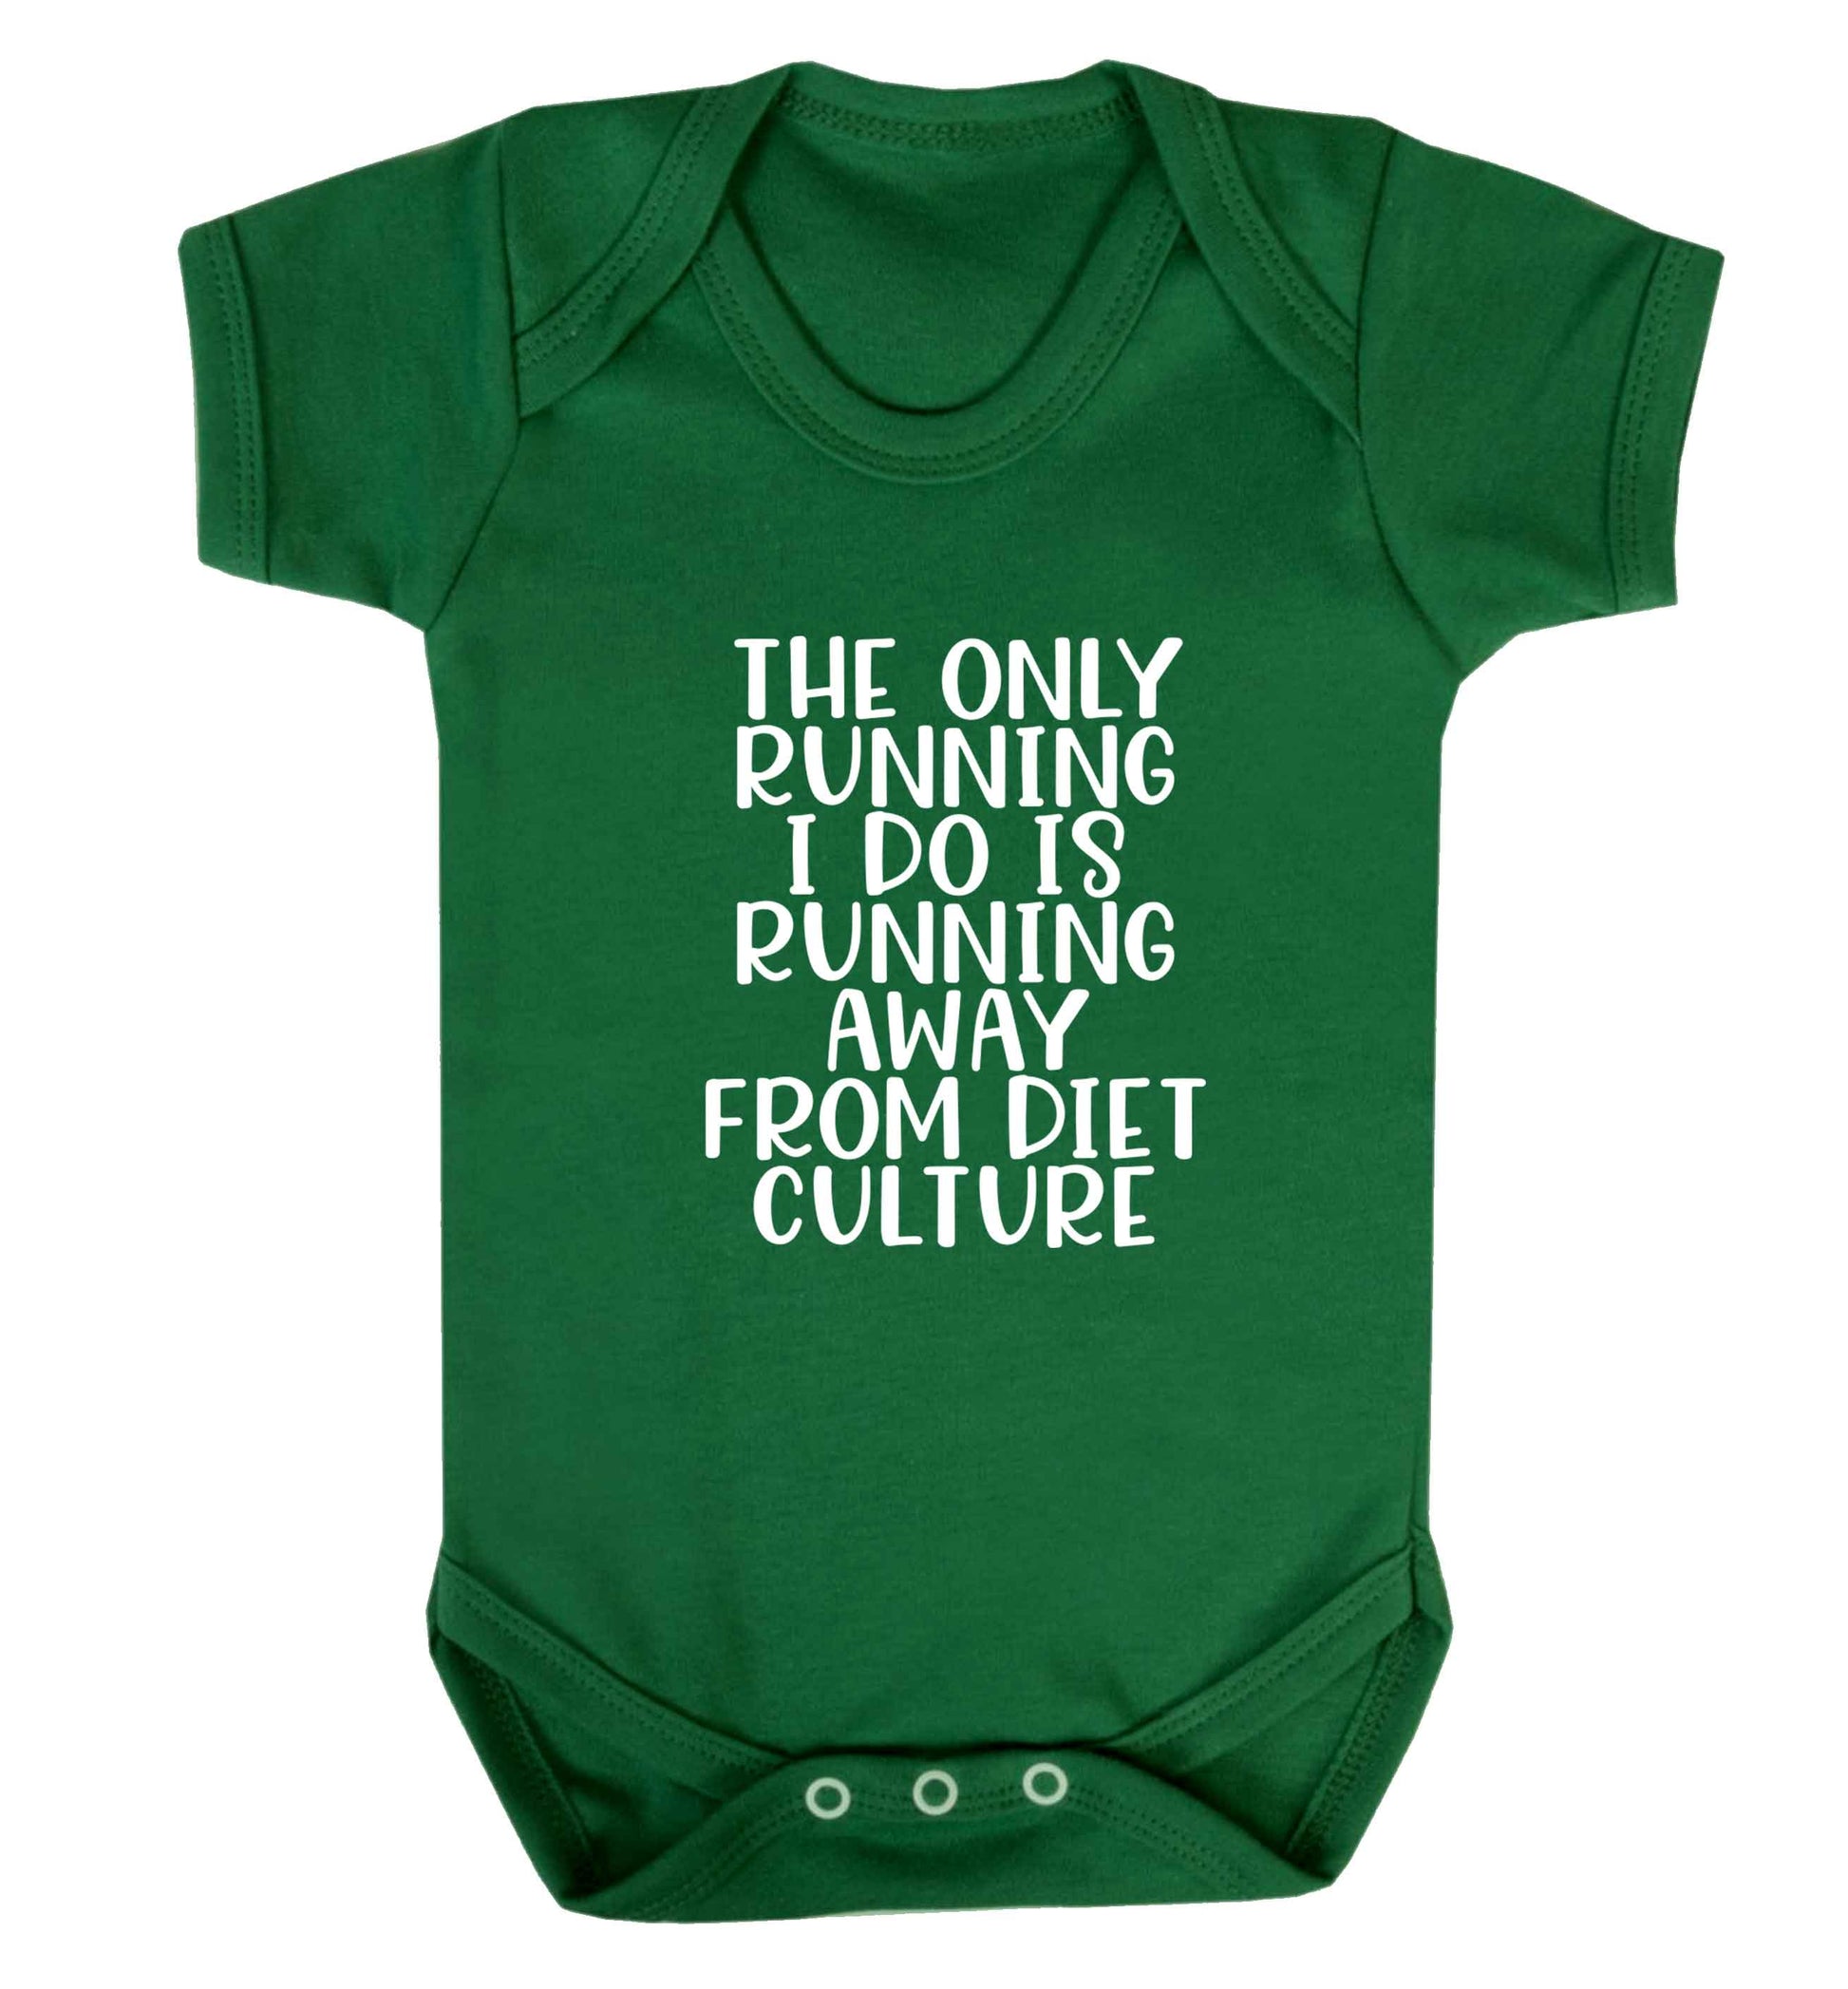 The only running I do is running away from diet culture baby vest green 18-24 months